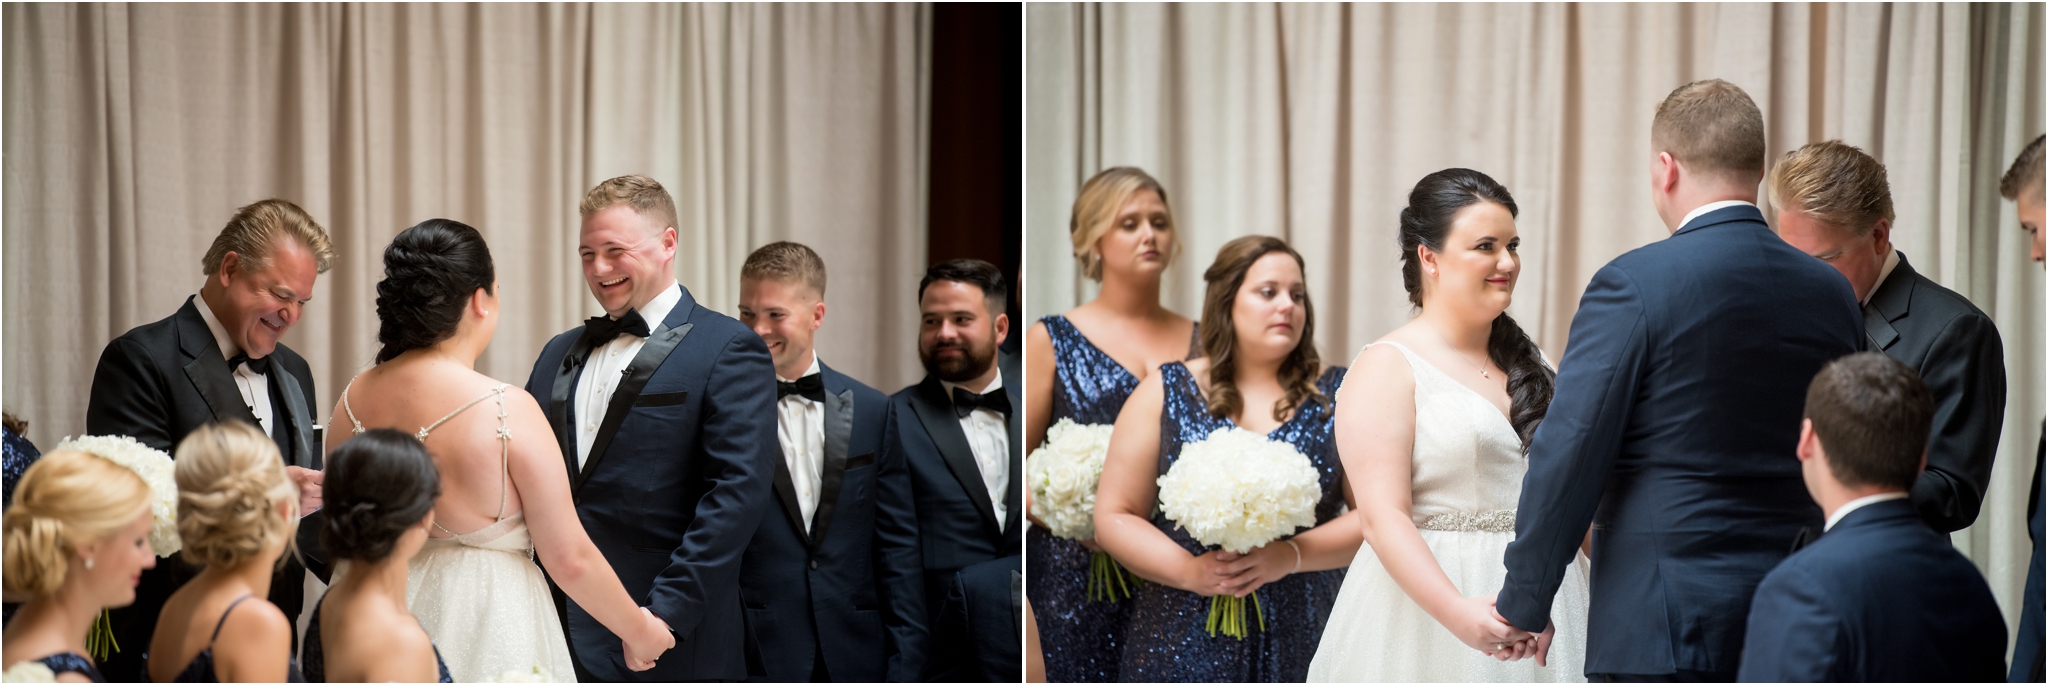 Indiana State House Ceremony | Sarah and Rachel Wedding Photographers | Indianapolis, IN | Exchanging Vows